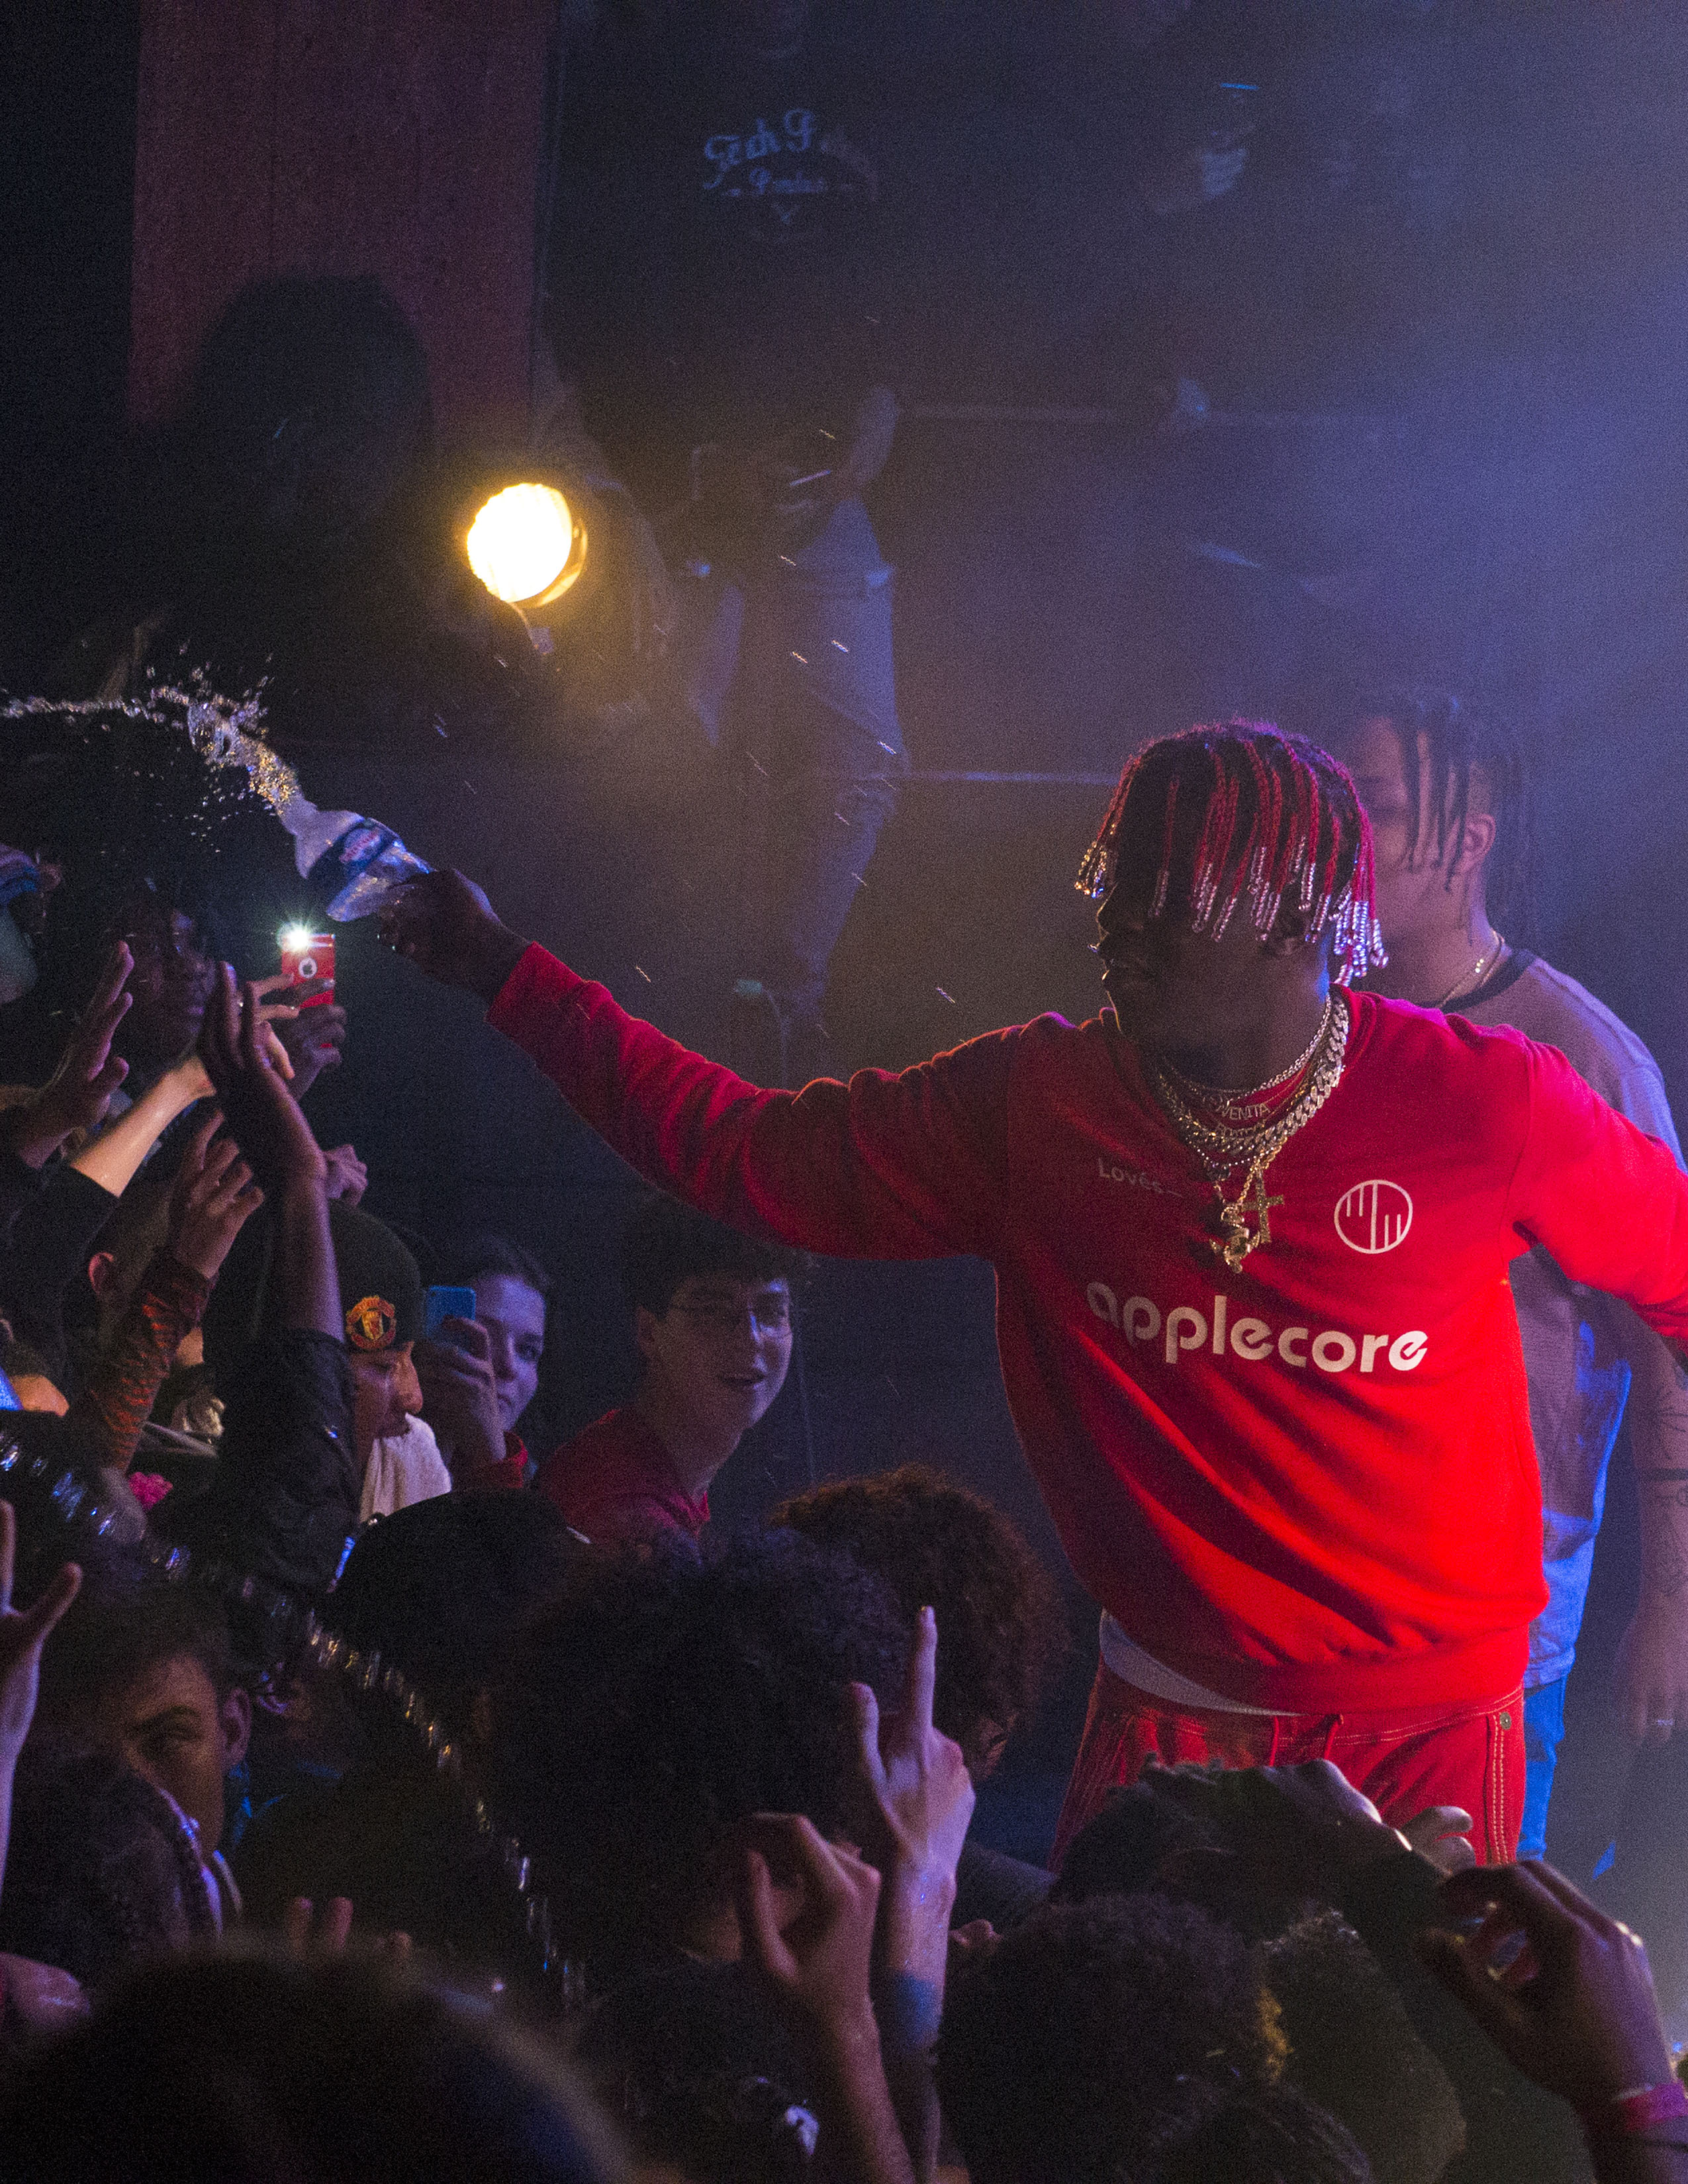 SPOTTED: Lil Yatchy Performs In Paris Wearing Applecore